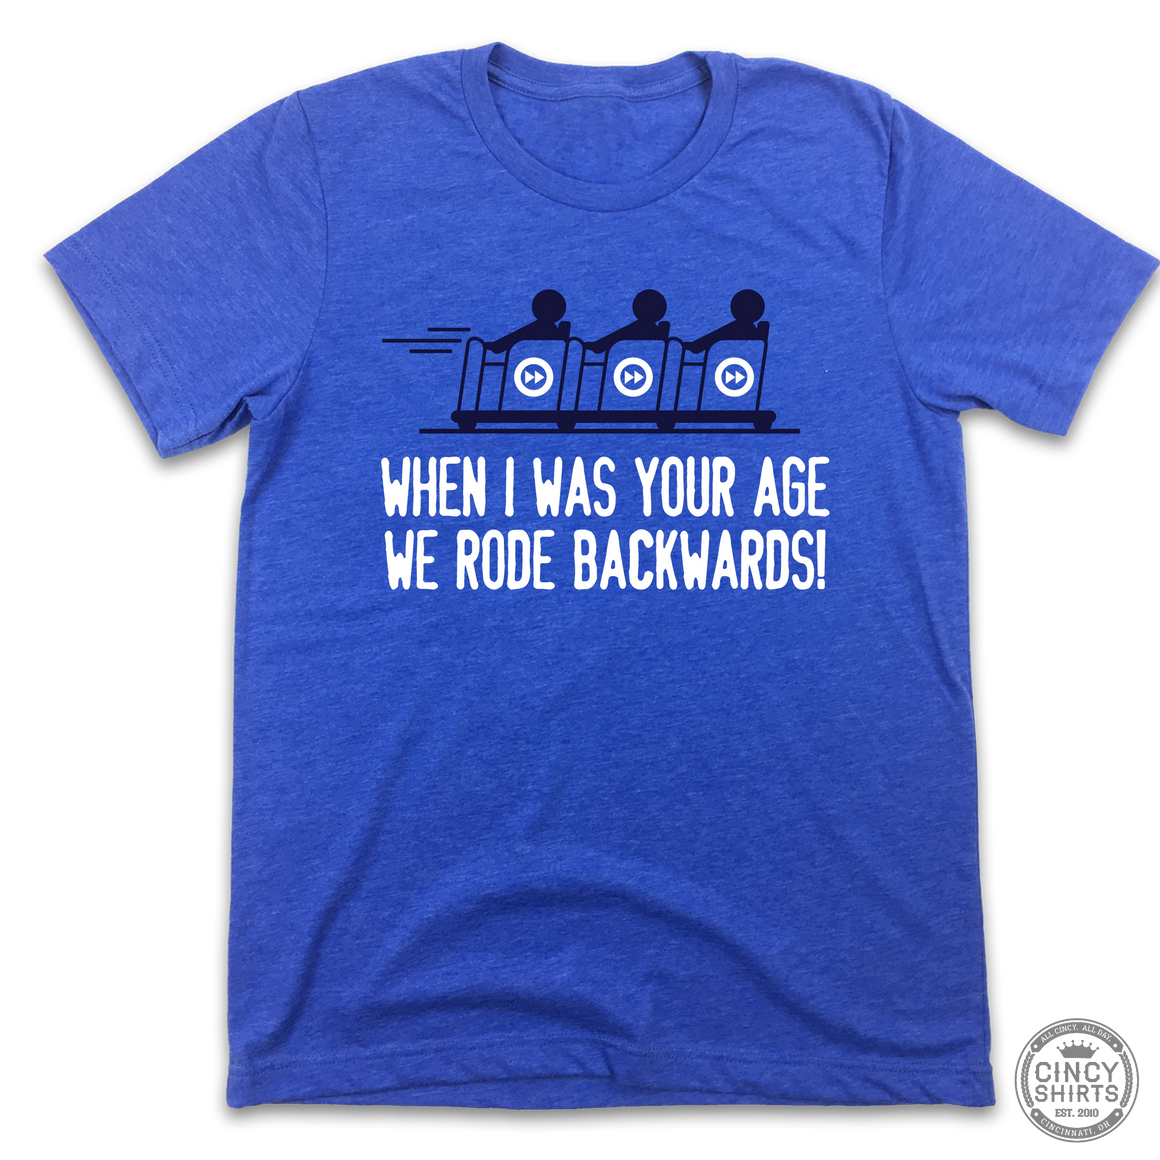 When I Was Your Age We Rode Backwards! - Cincy Shirts